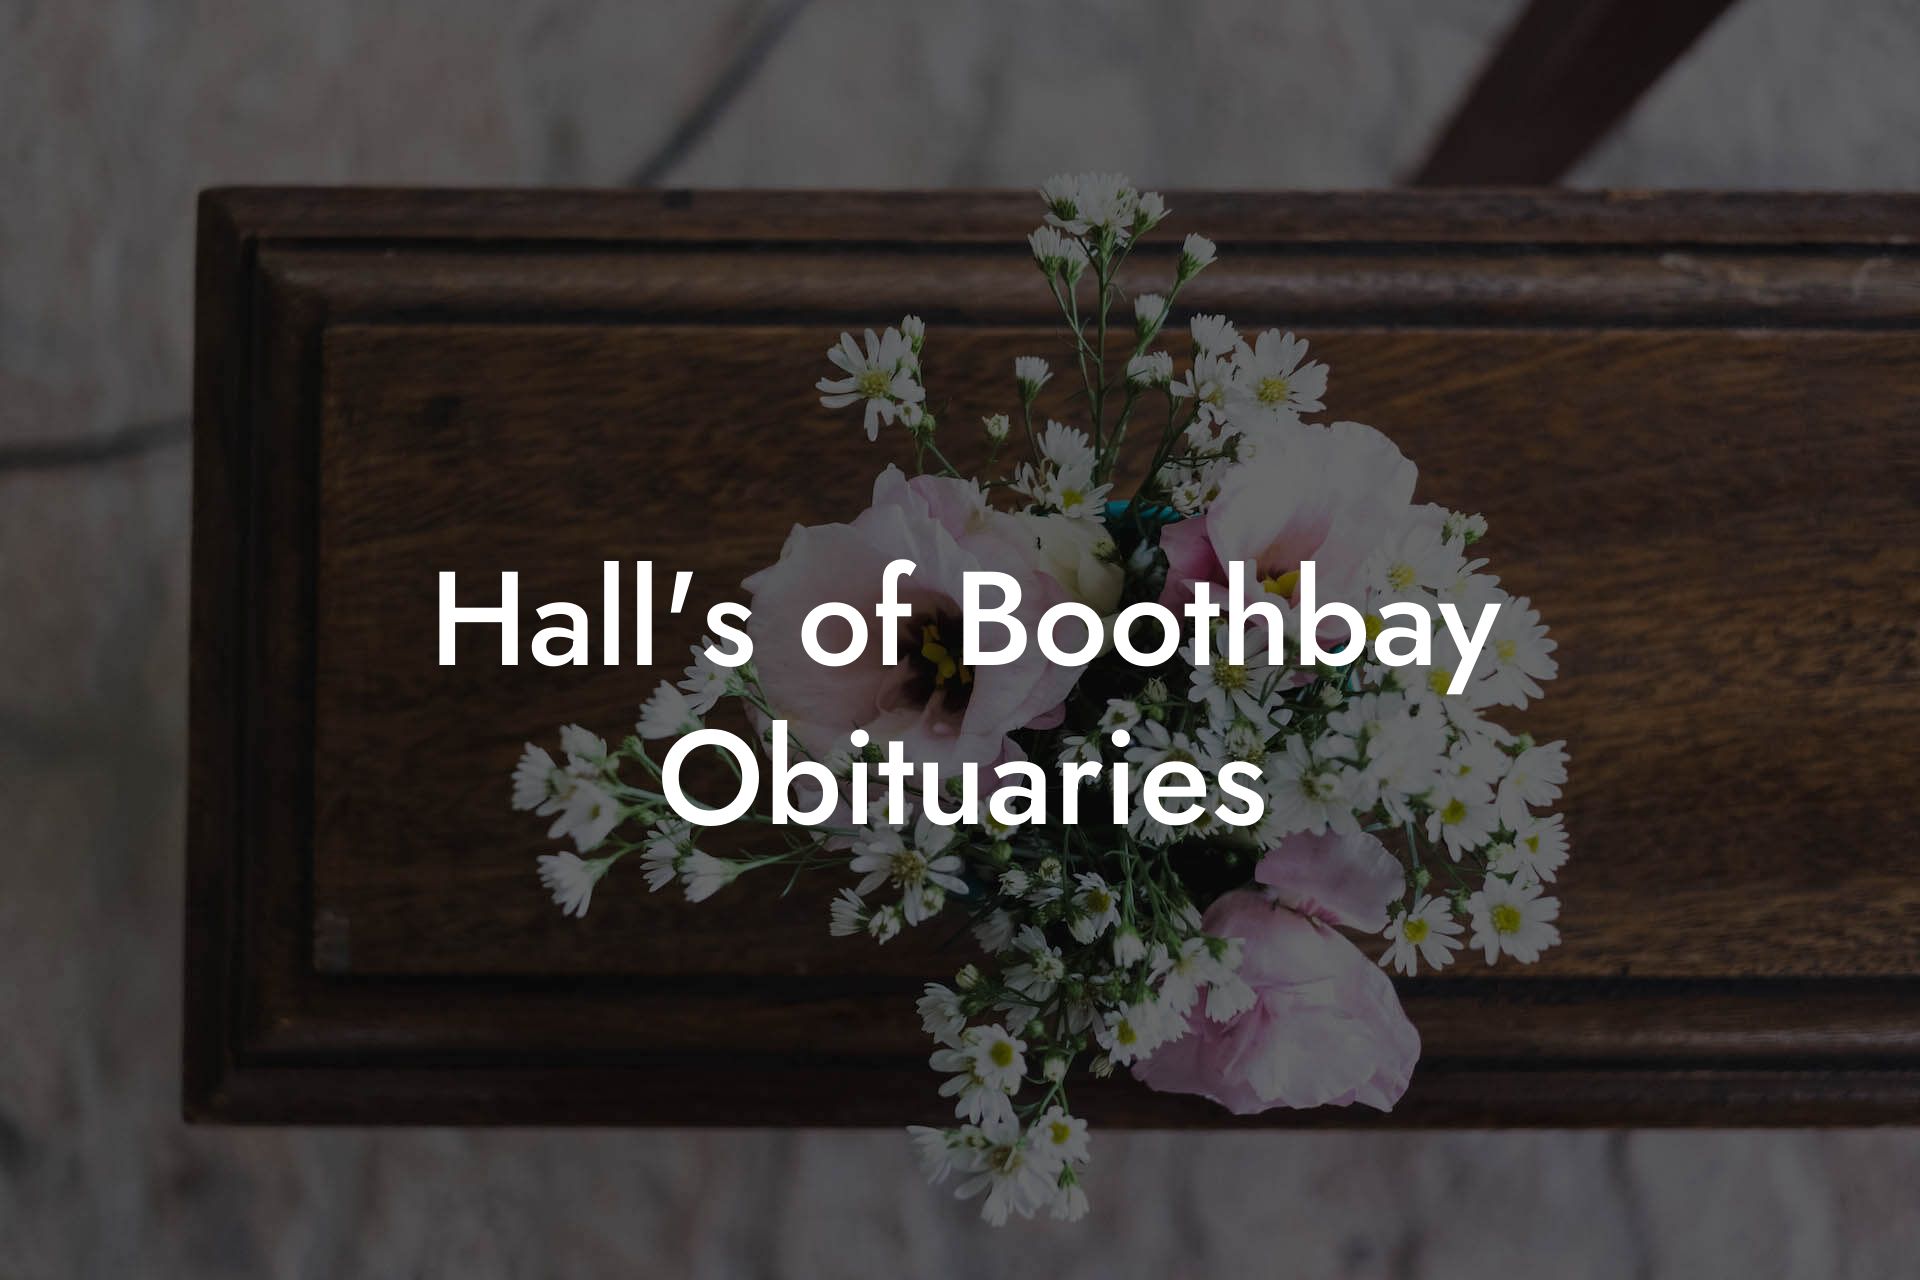 Hall's of Boothbay Obituaries